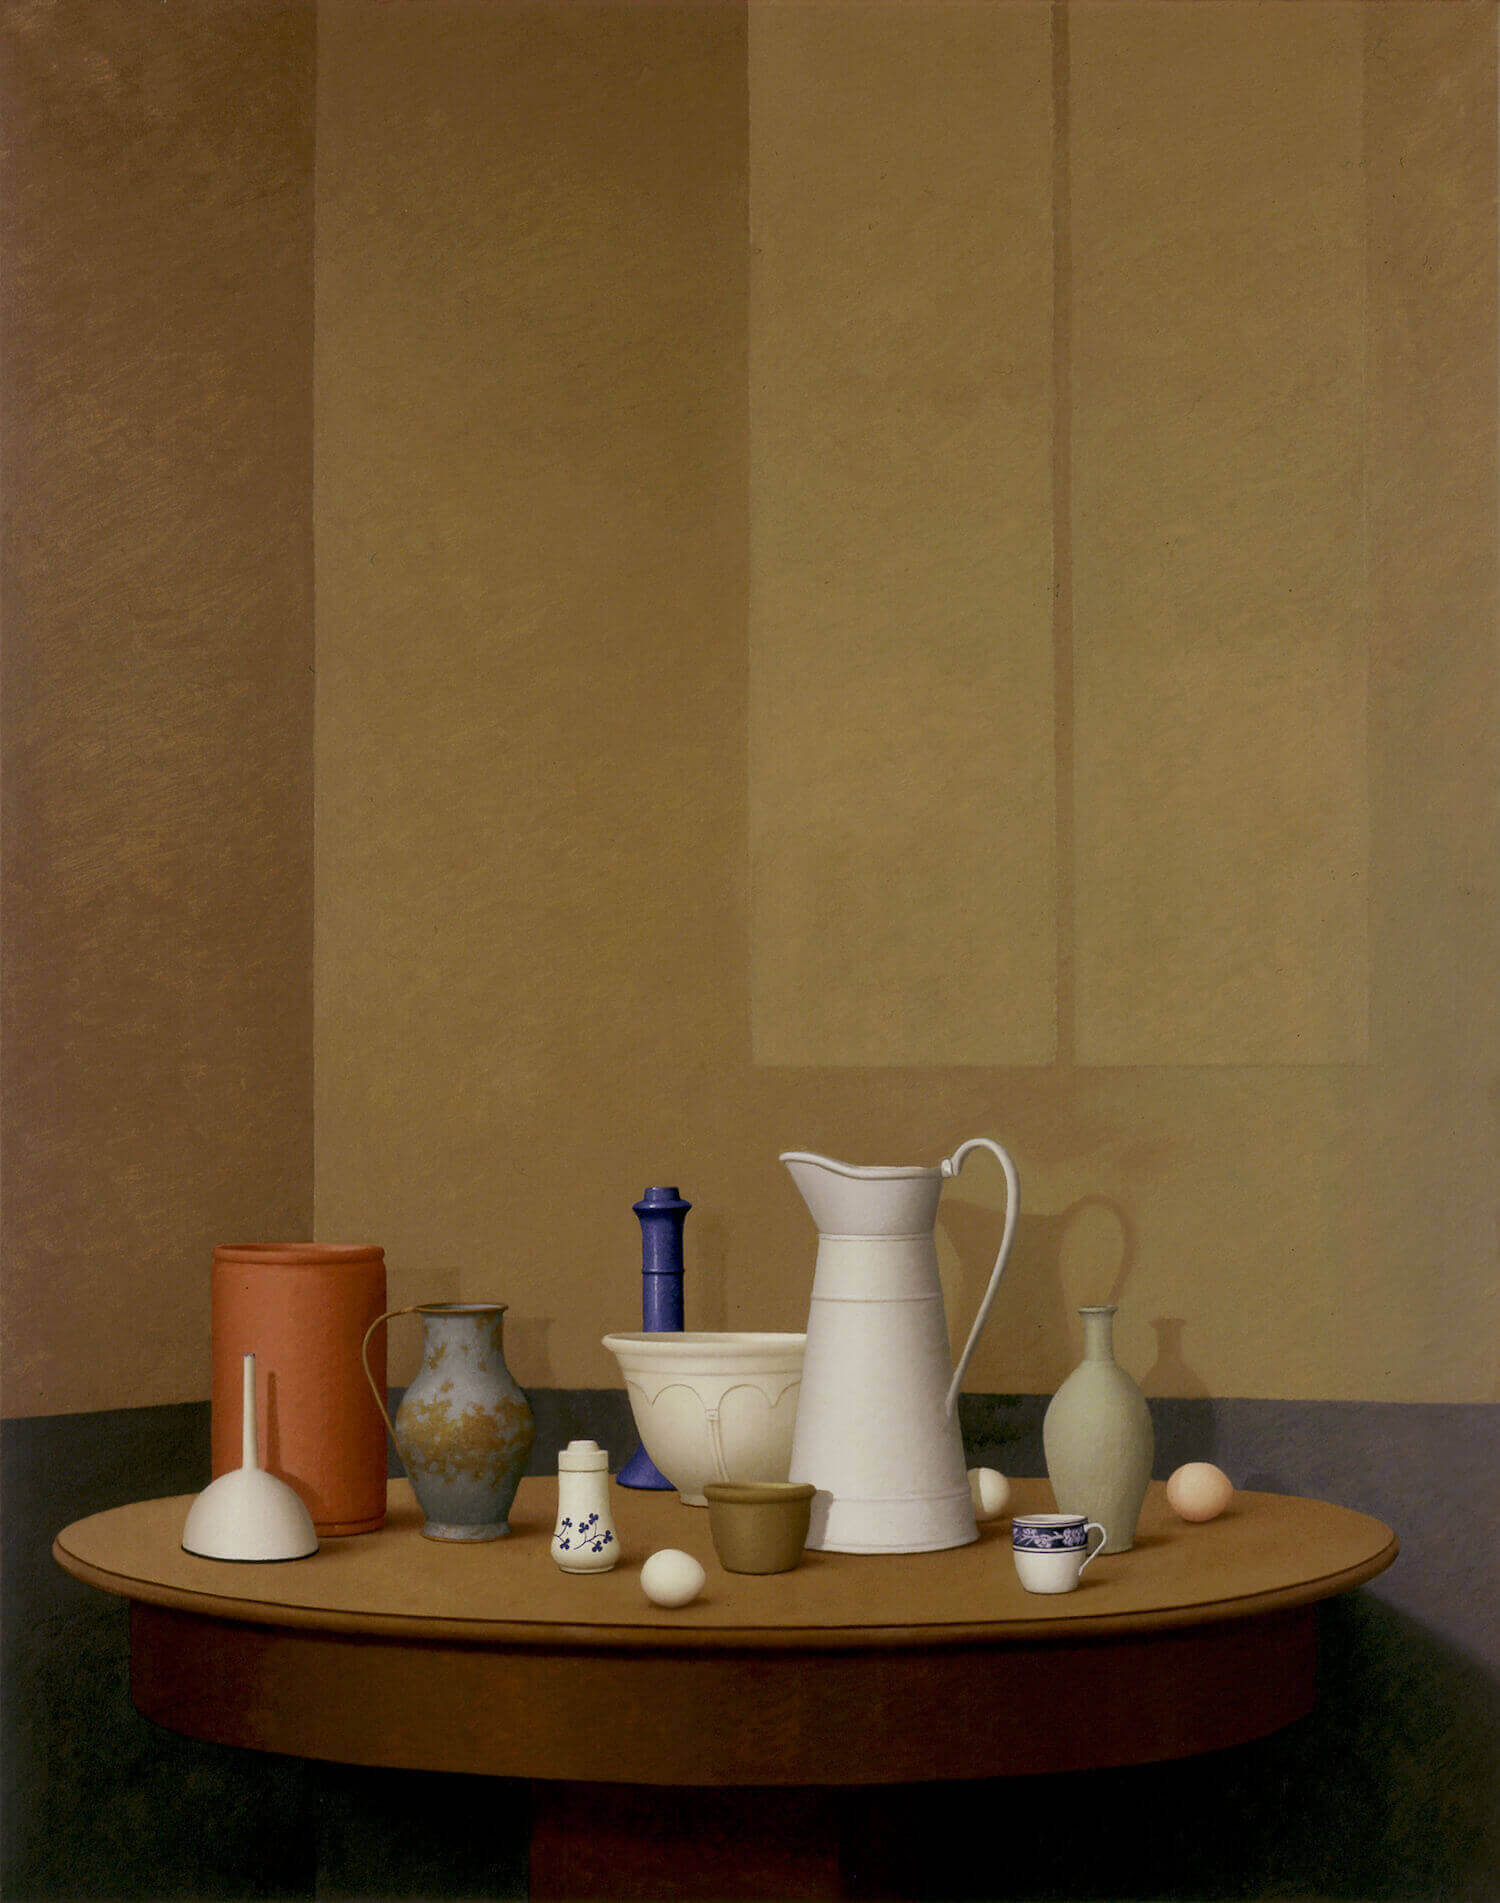 William Bailey, Turning, 2003, oil on linen, 70 x 55 inches (courtesy of the artist and Betty Cuningham Gallery)